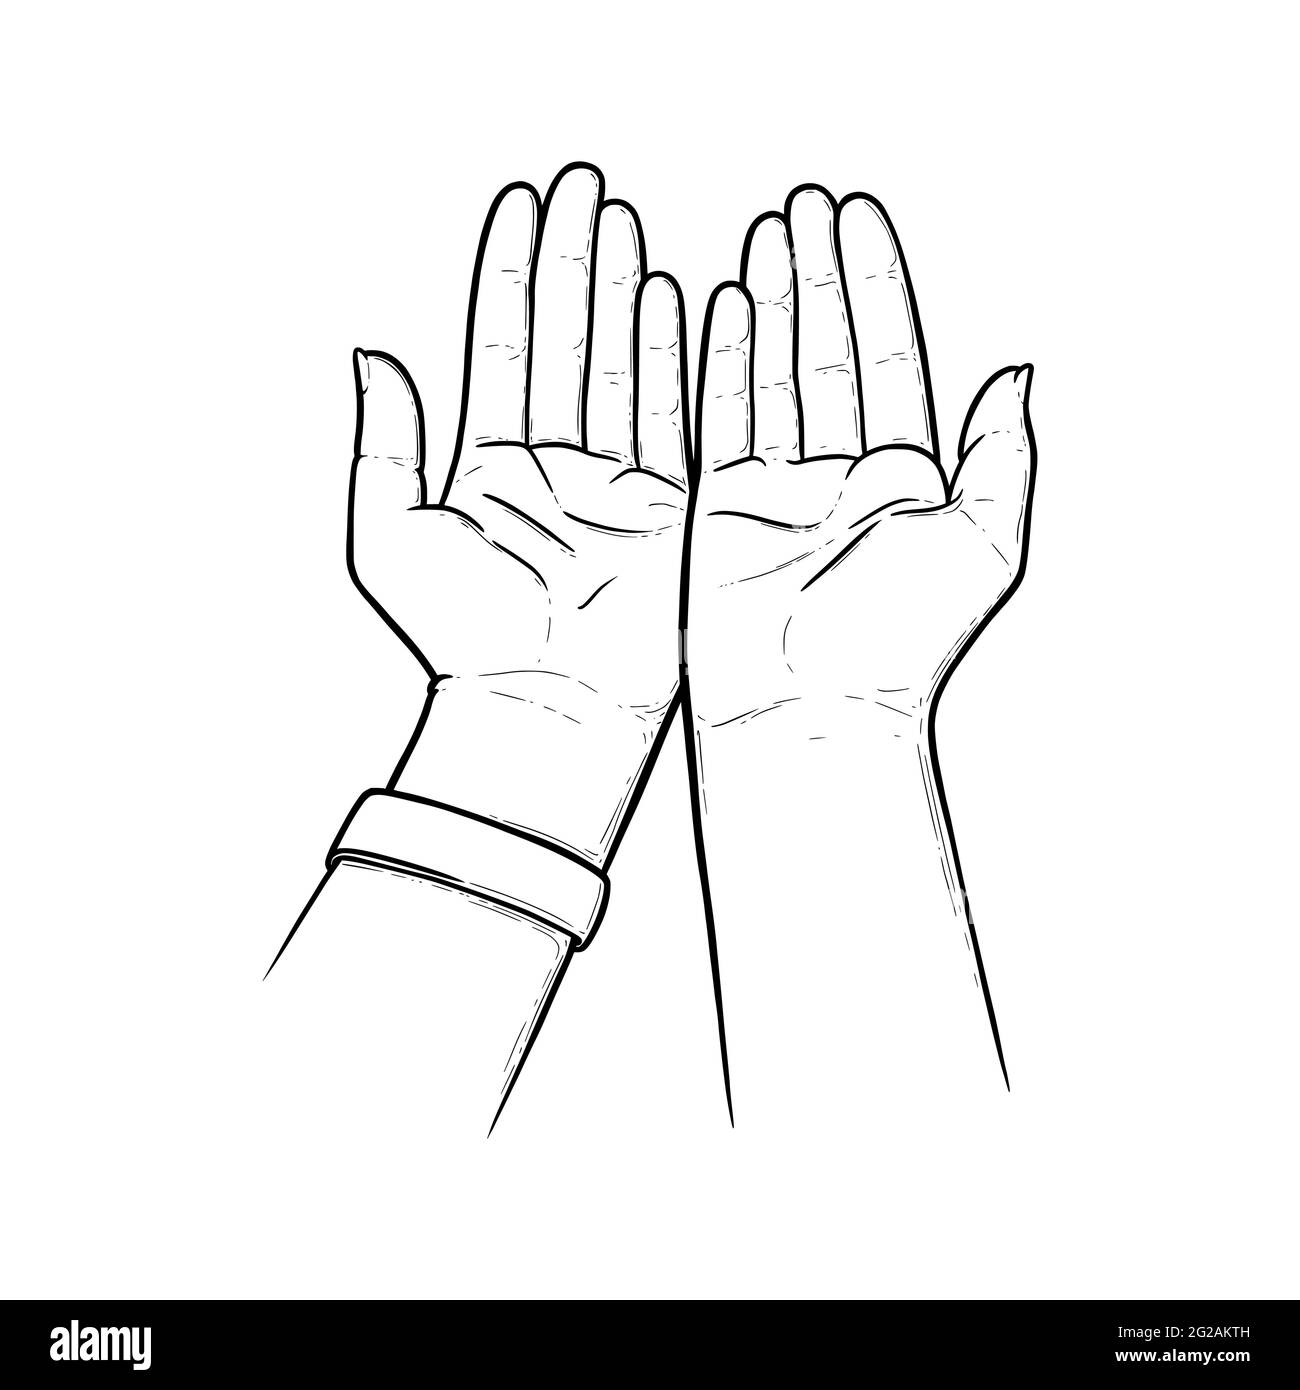 Outstretched hands praying for help and care. Open empty hands asking for protection. Sketch vector illustration isolated in white background Stock Vector